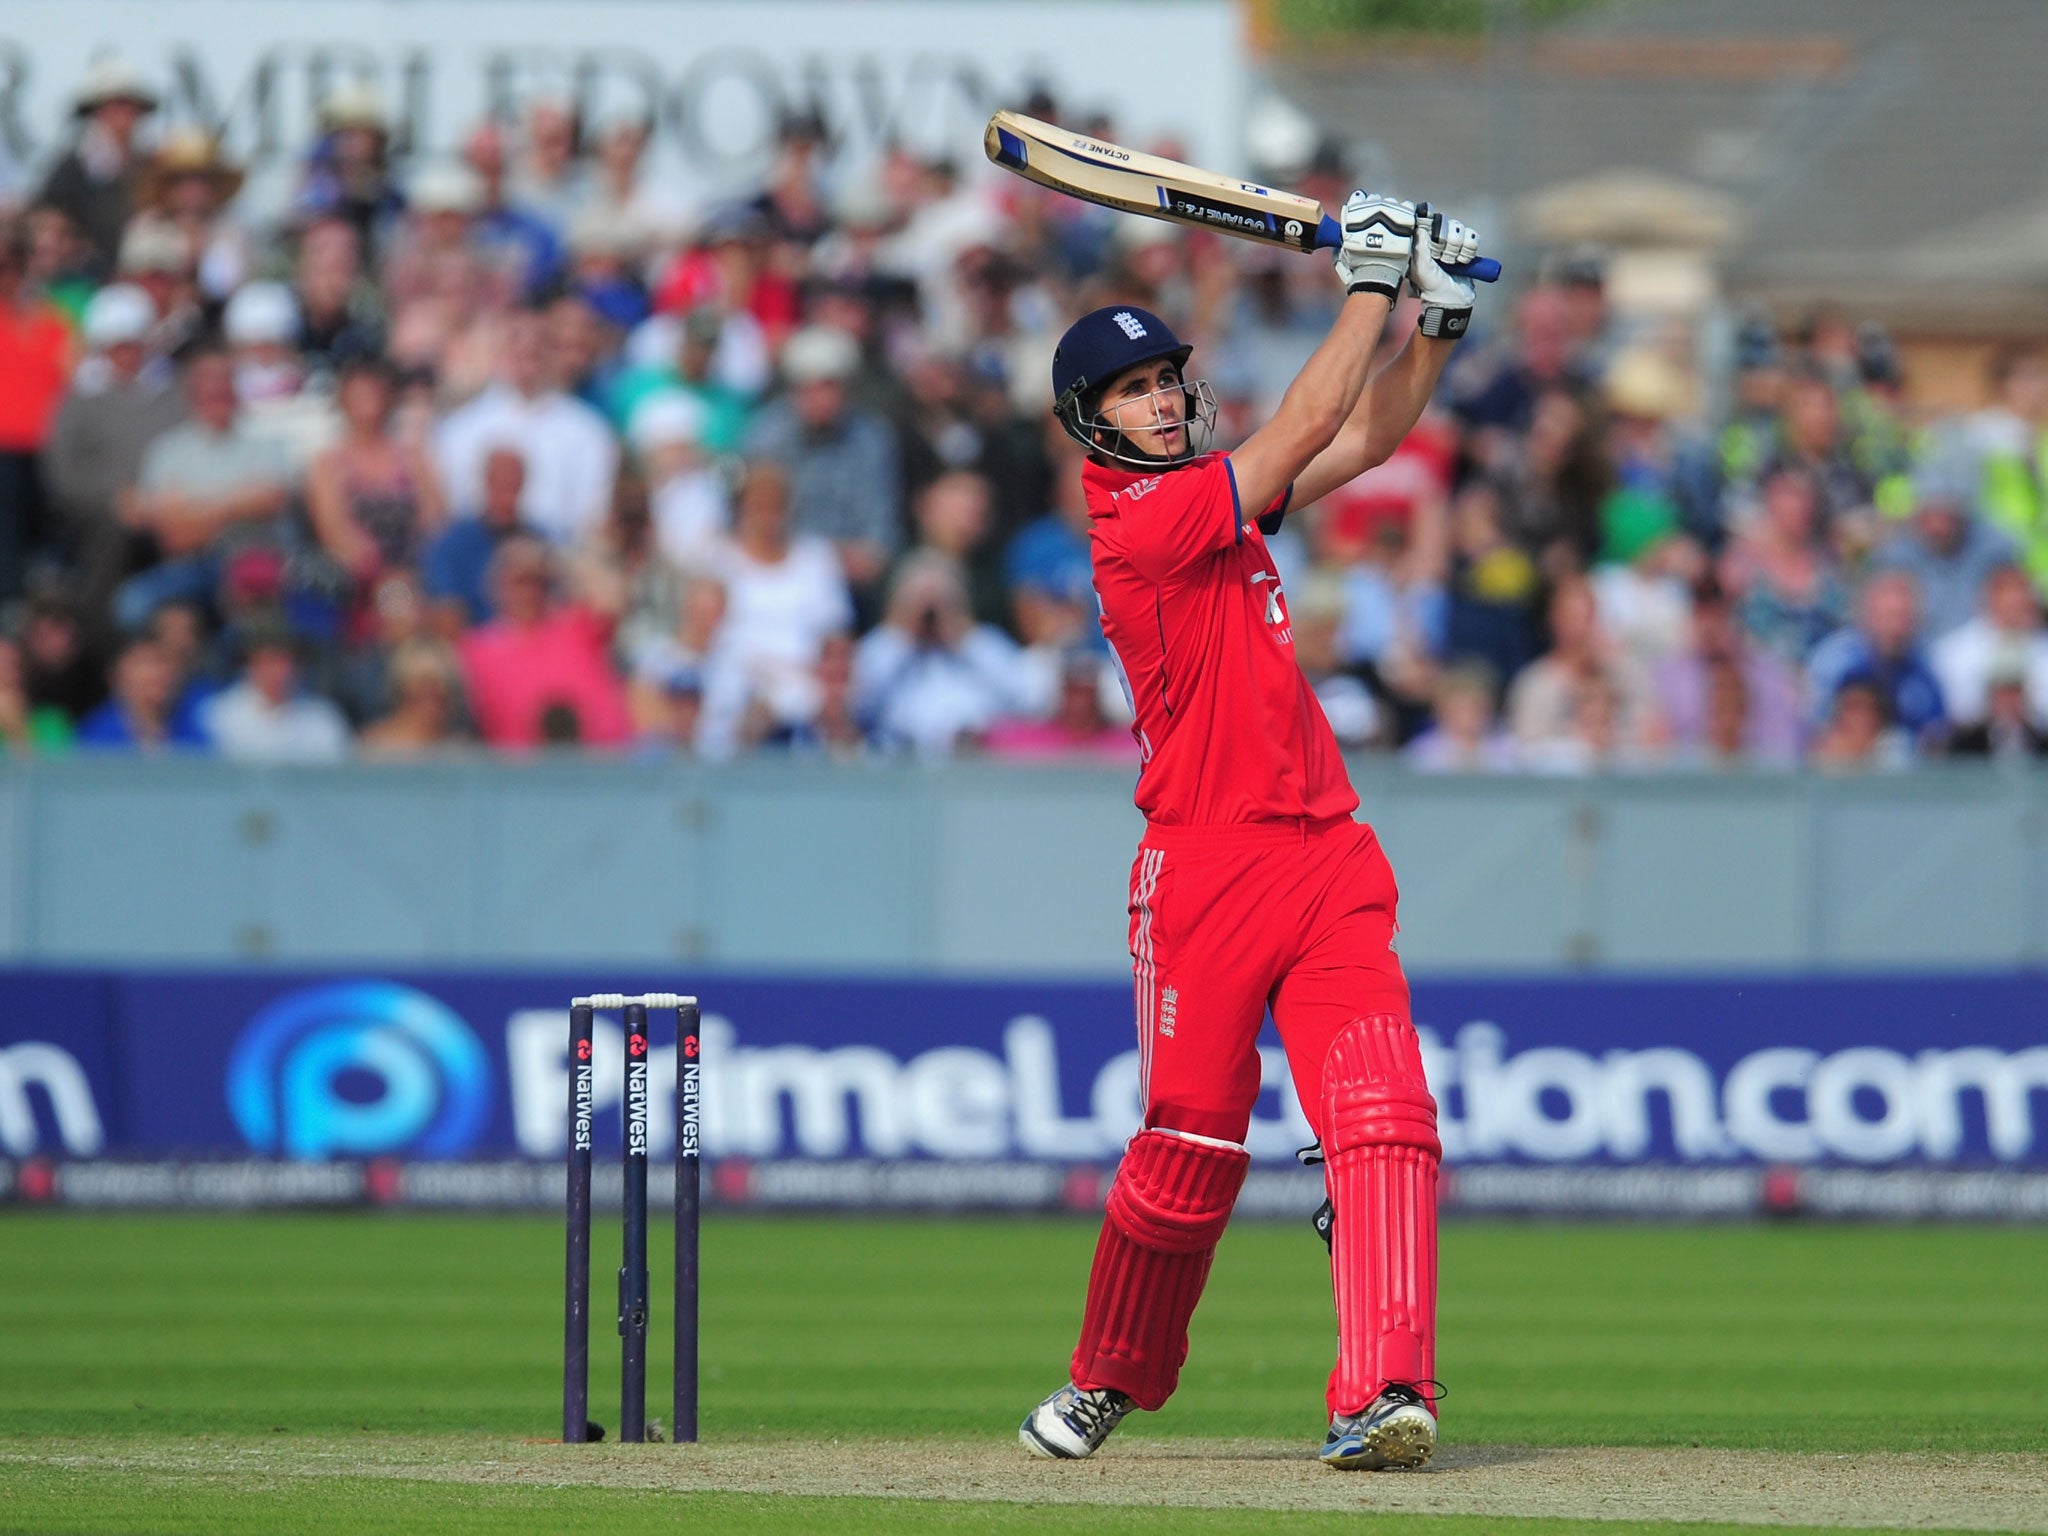 England batsman Alex Hales hits out during the 2nd NatWest series T20